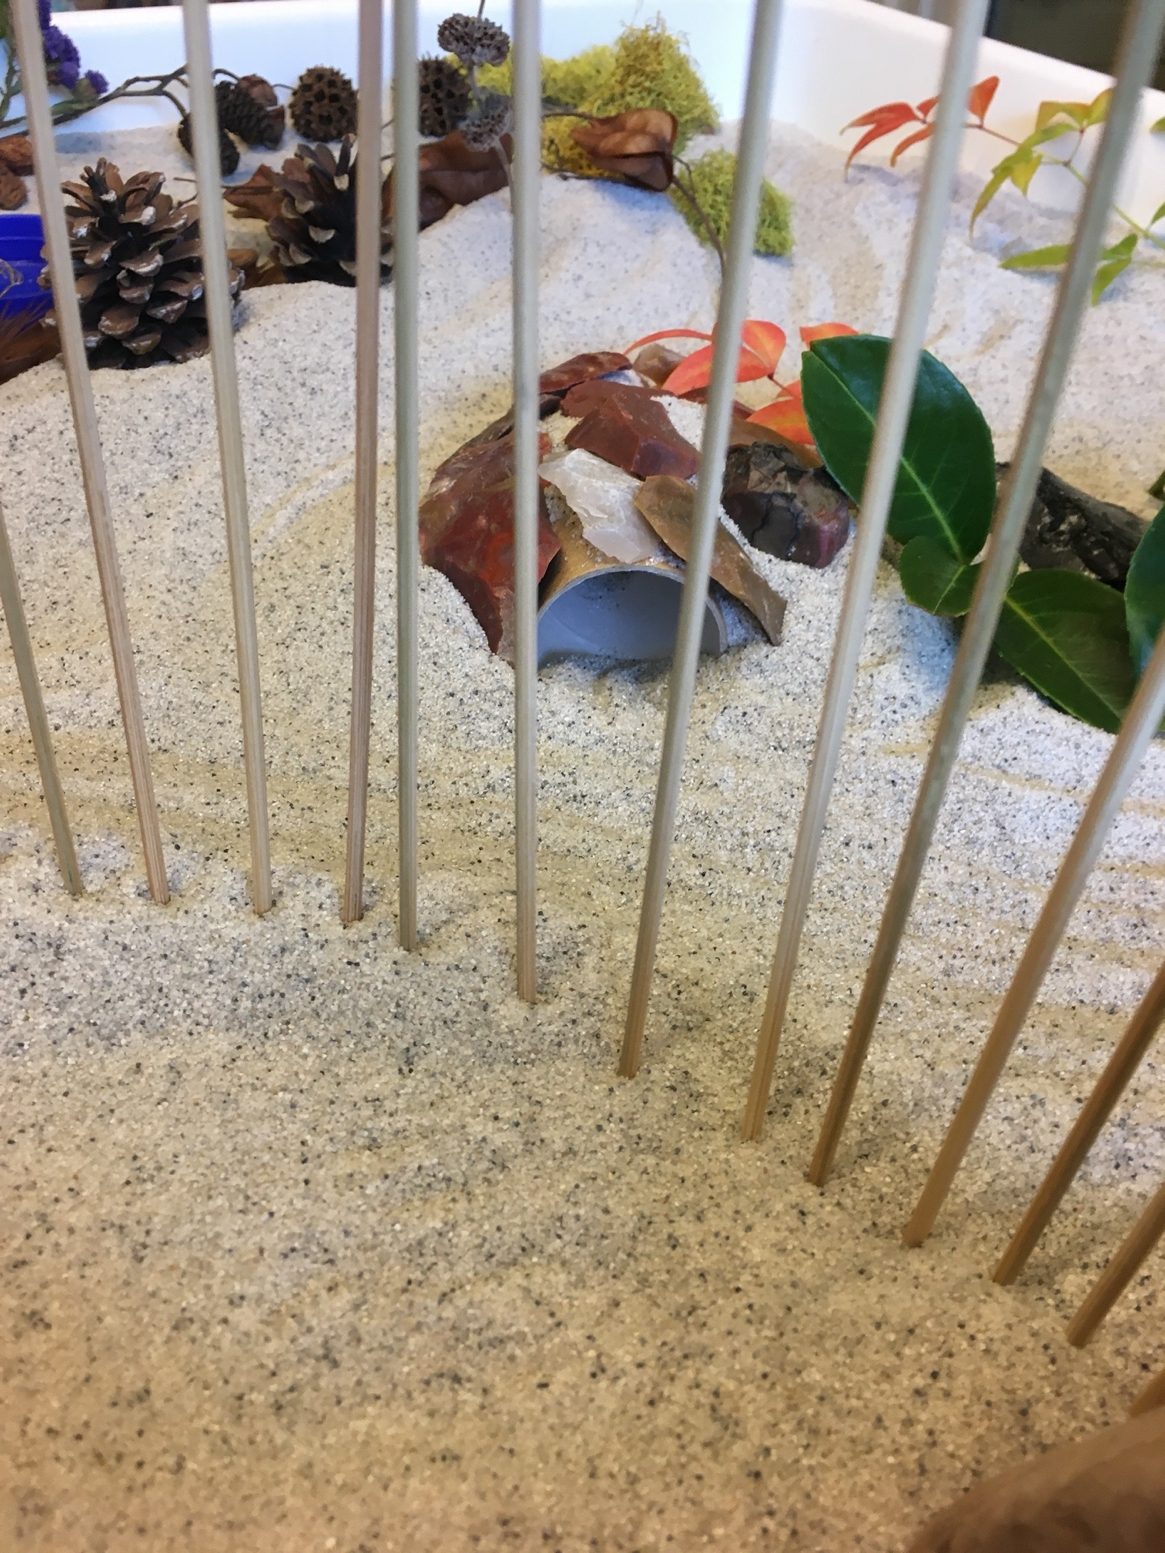 A group of birds in a cage  Description automatically generated with low confidence